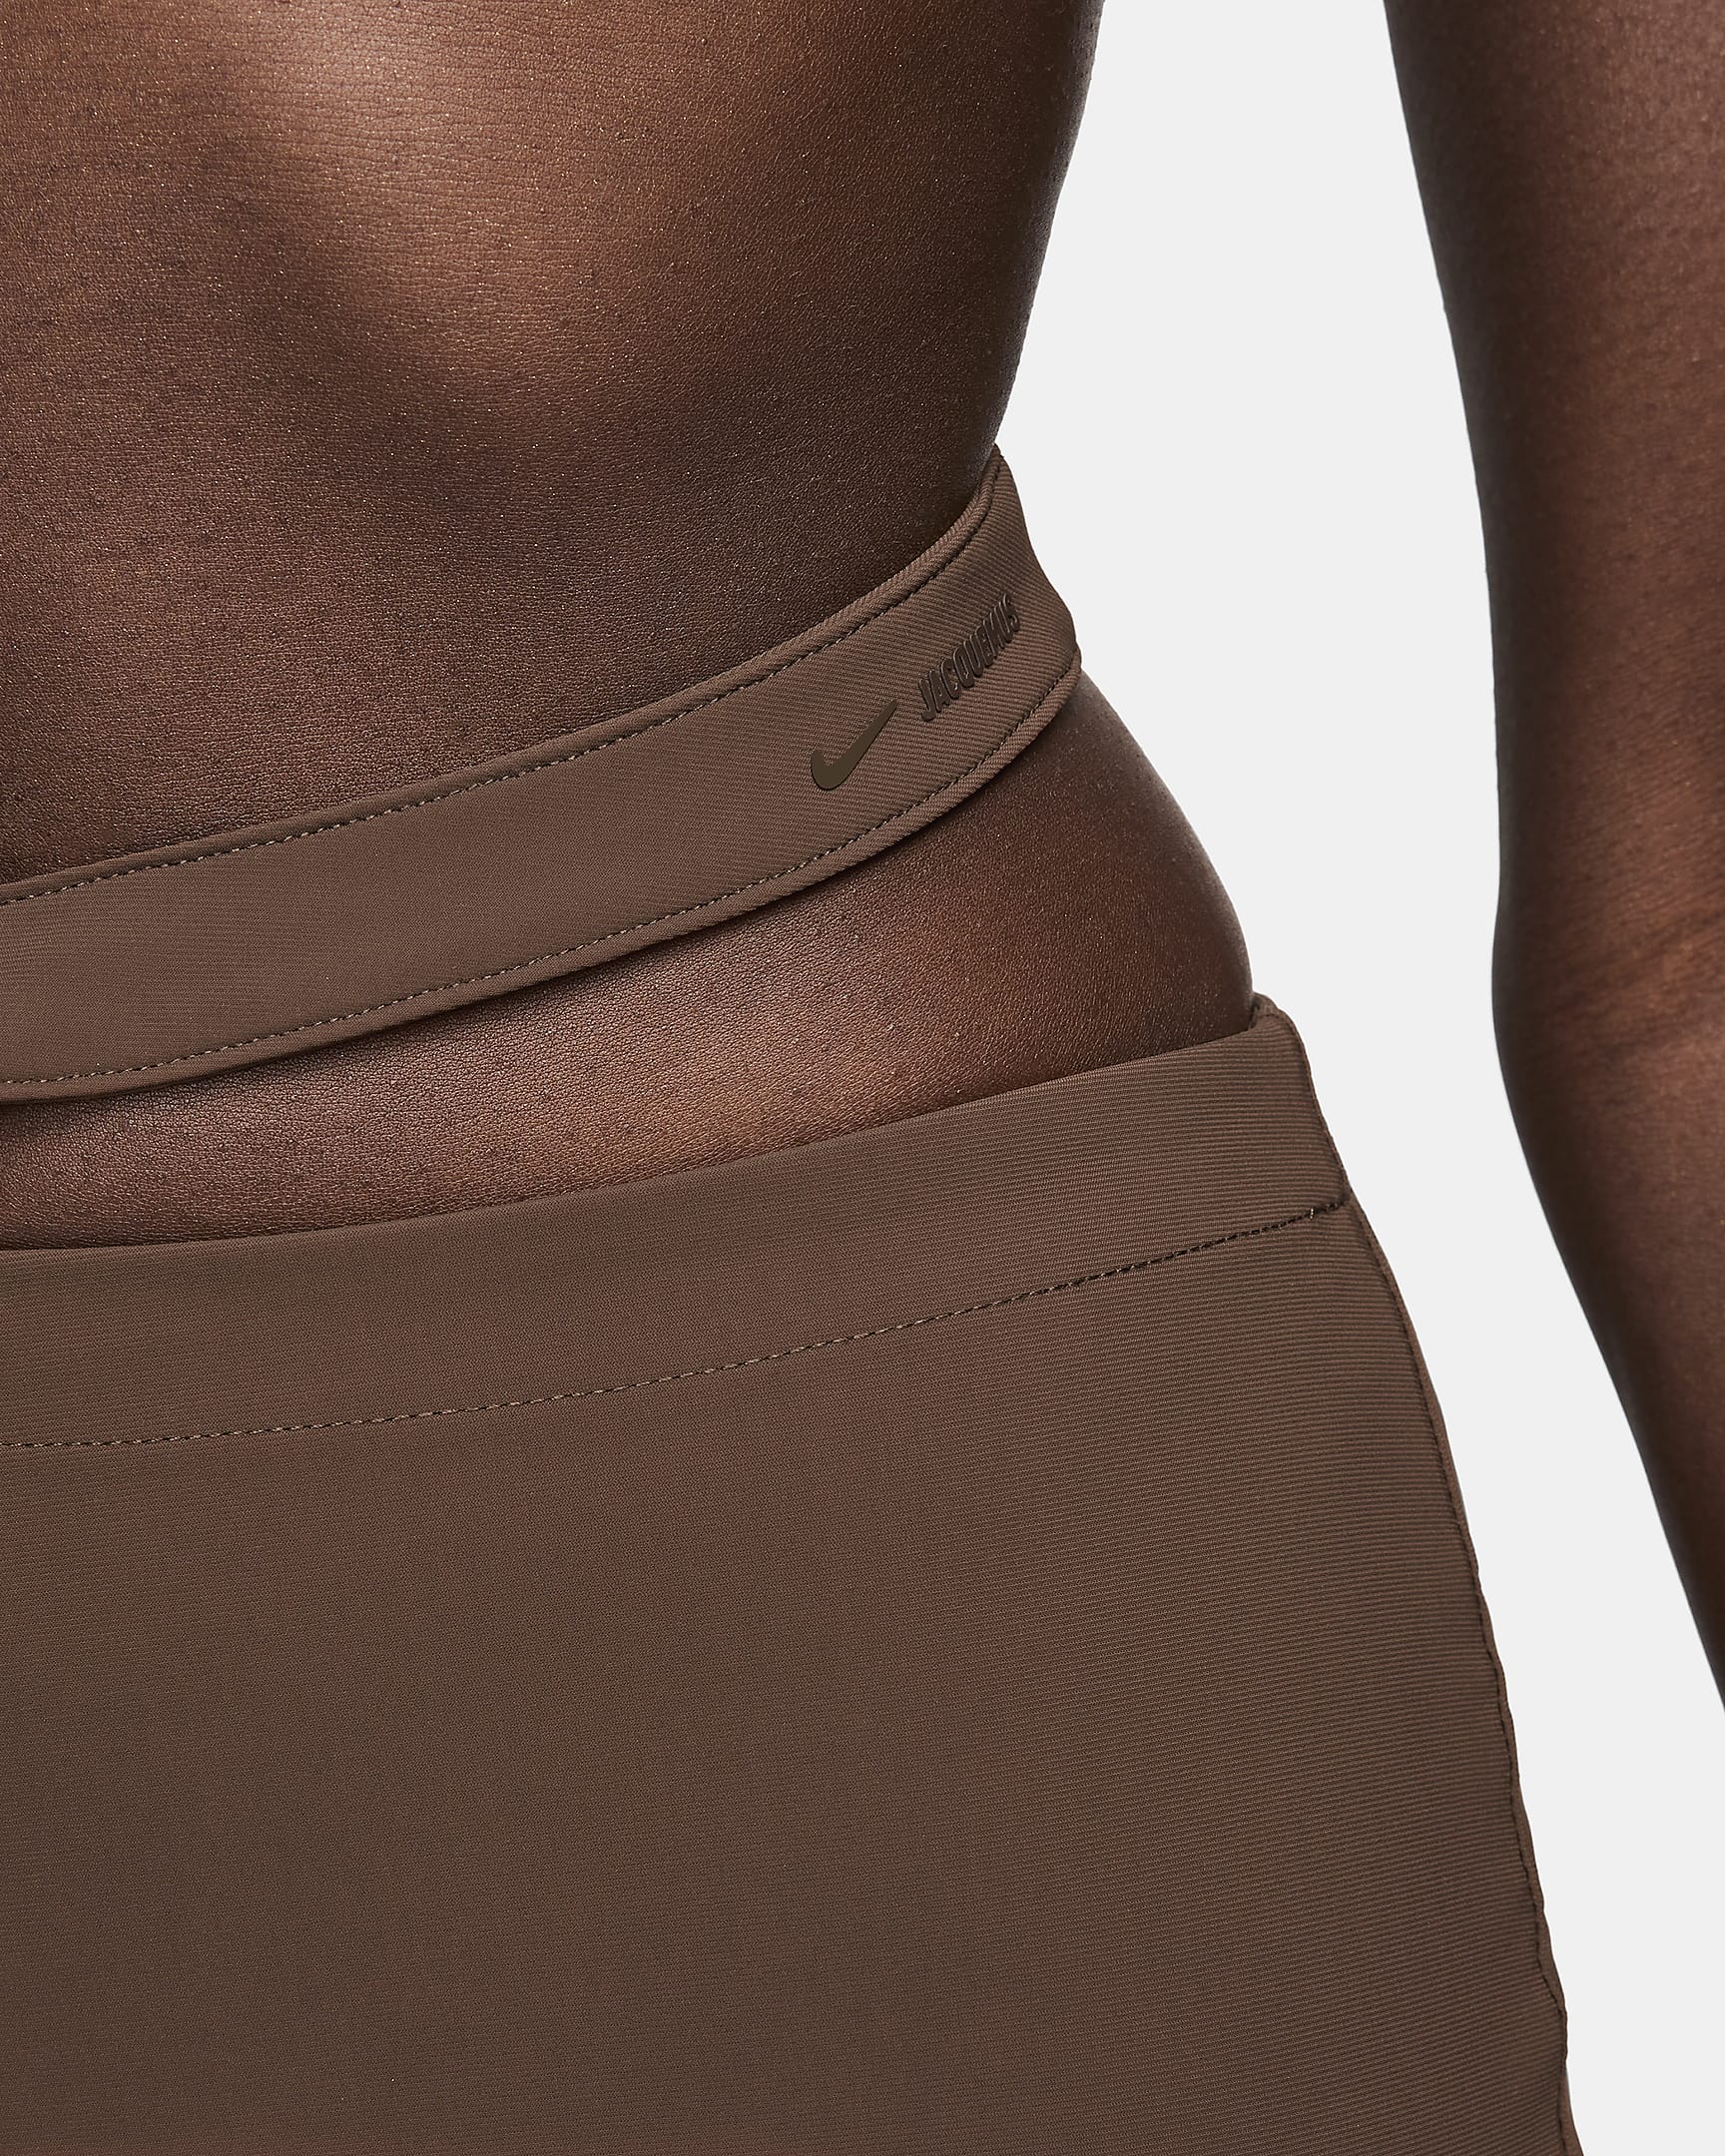 Nike x Jacquemus Women's Trousers - Cacao Wow